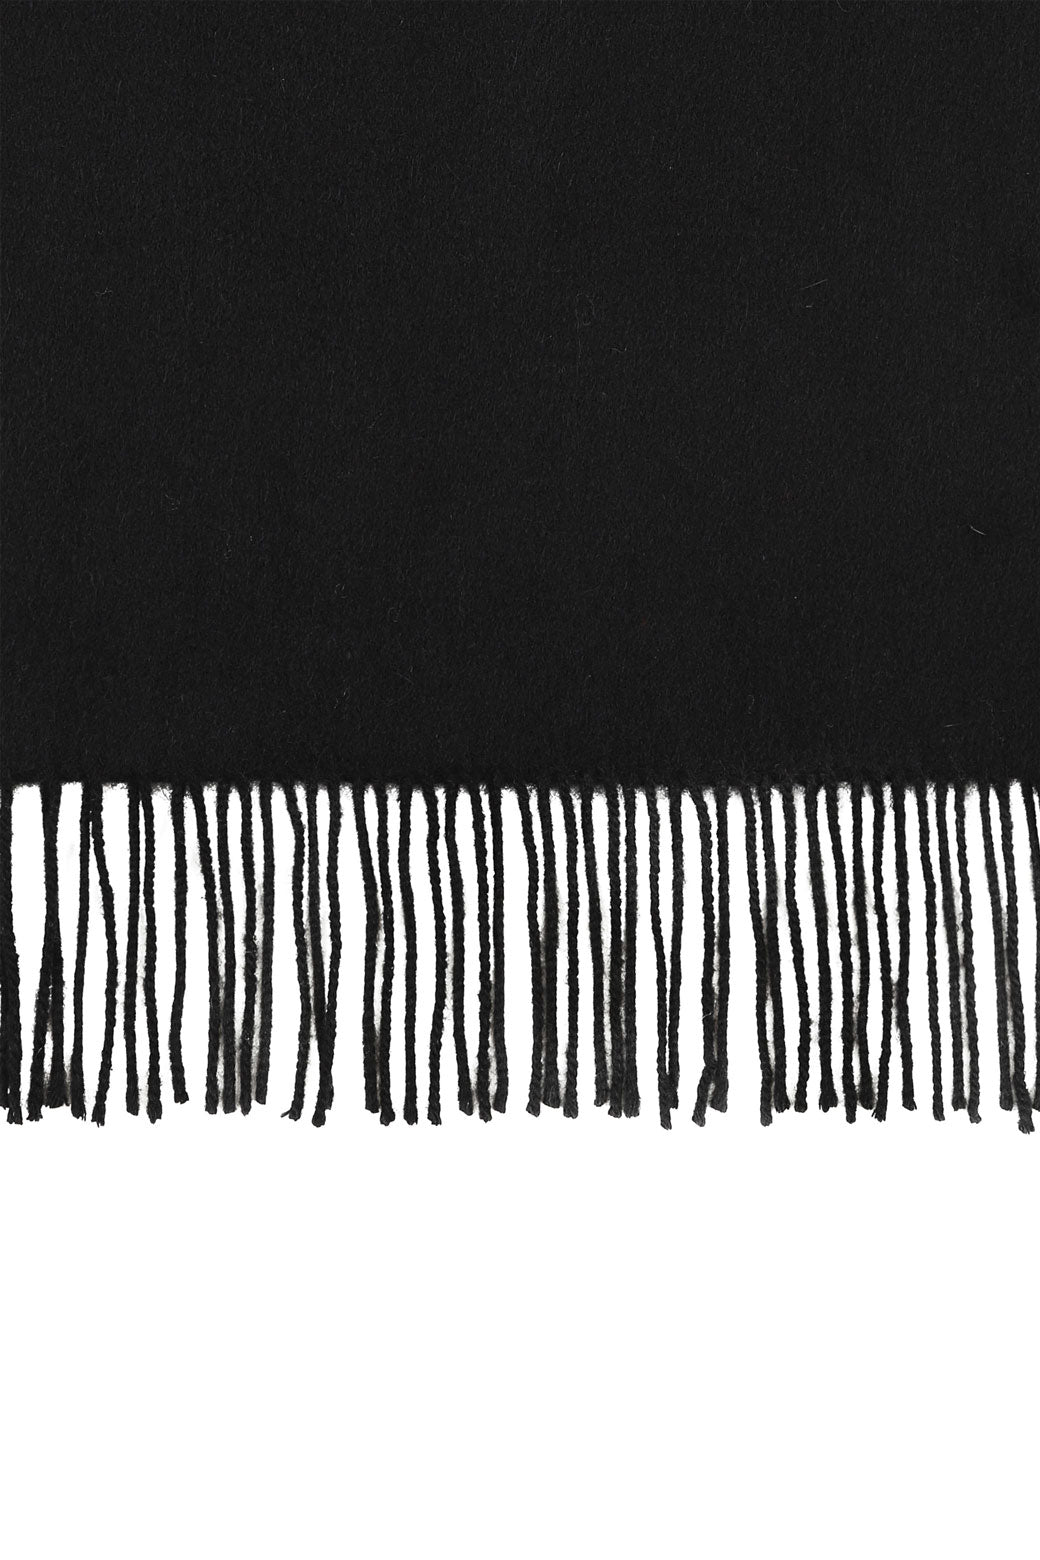 Perfectly horizontal view of the fringe of a black pure cashmere scarf from Soho Scarves against a white background.